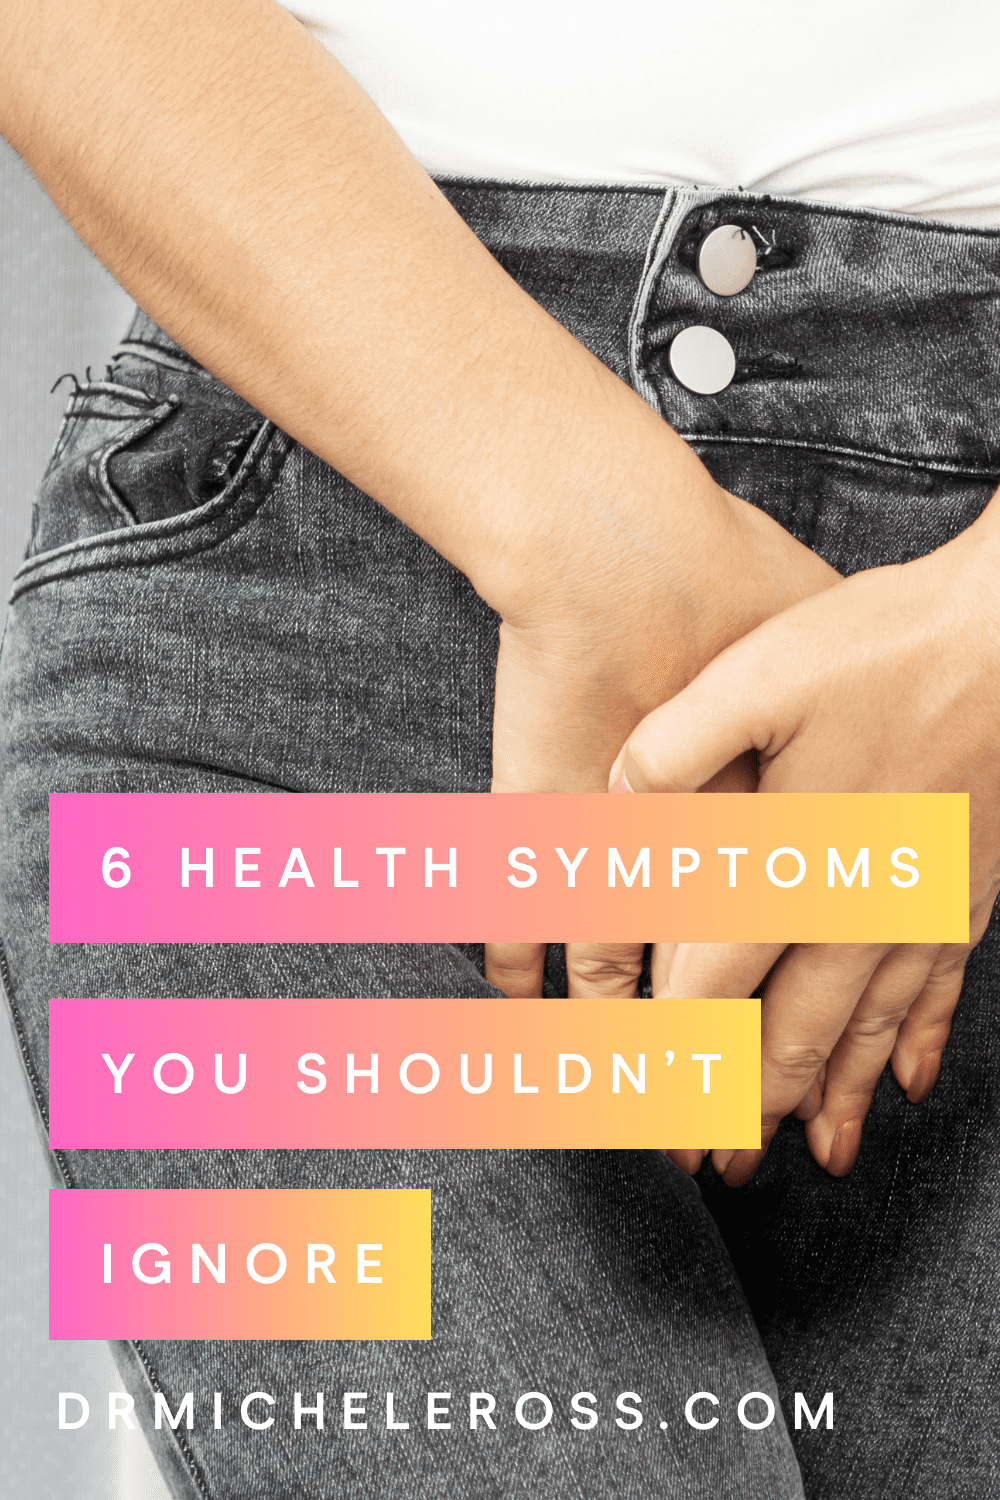 young woman in black jeans has to pee frequently bladder infection health symptoms